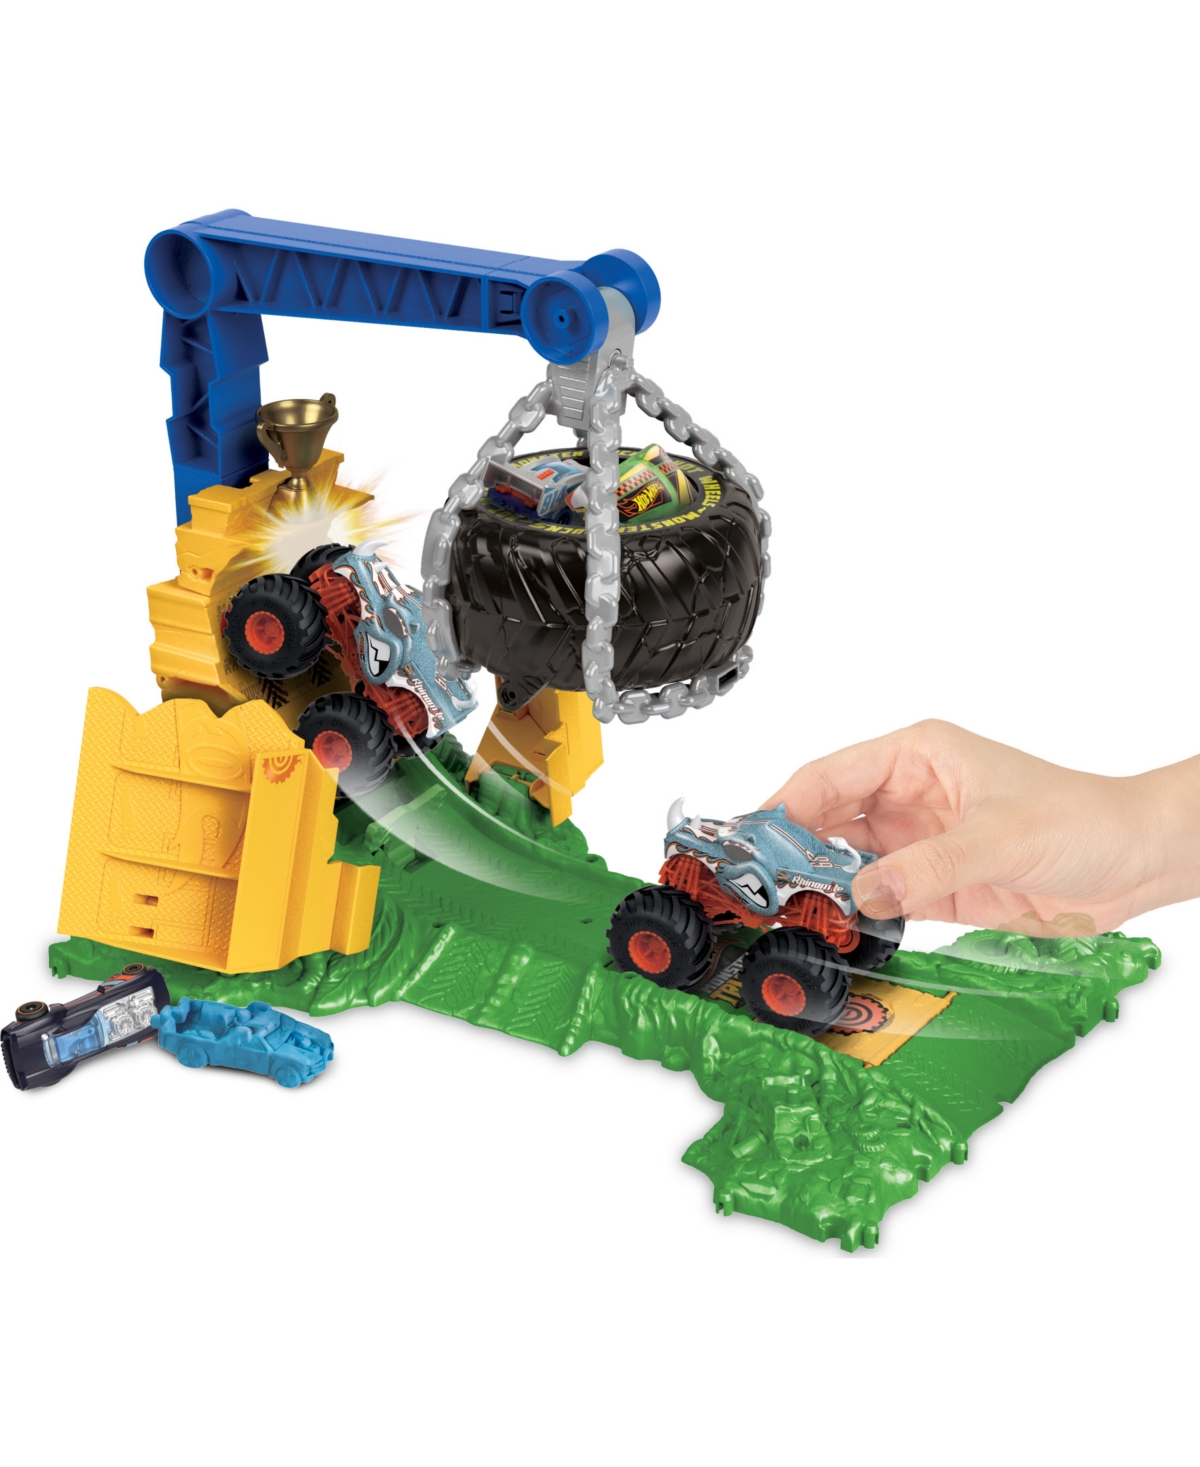 Shop Hot Wheels Monster Trucks Rhinomite Chargin' Challenge Playset With 1 Toy Truck And 2 Crushed Cars In Multicolor